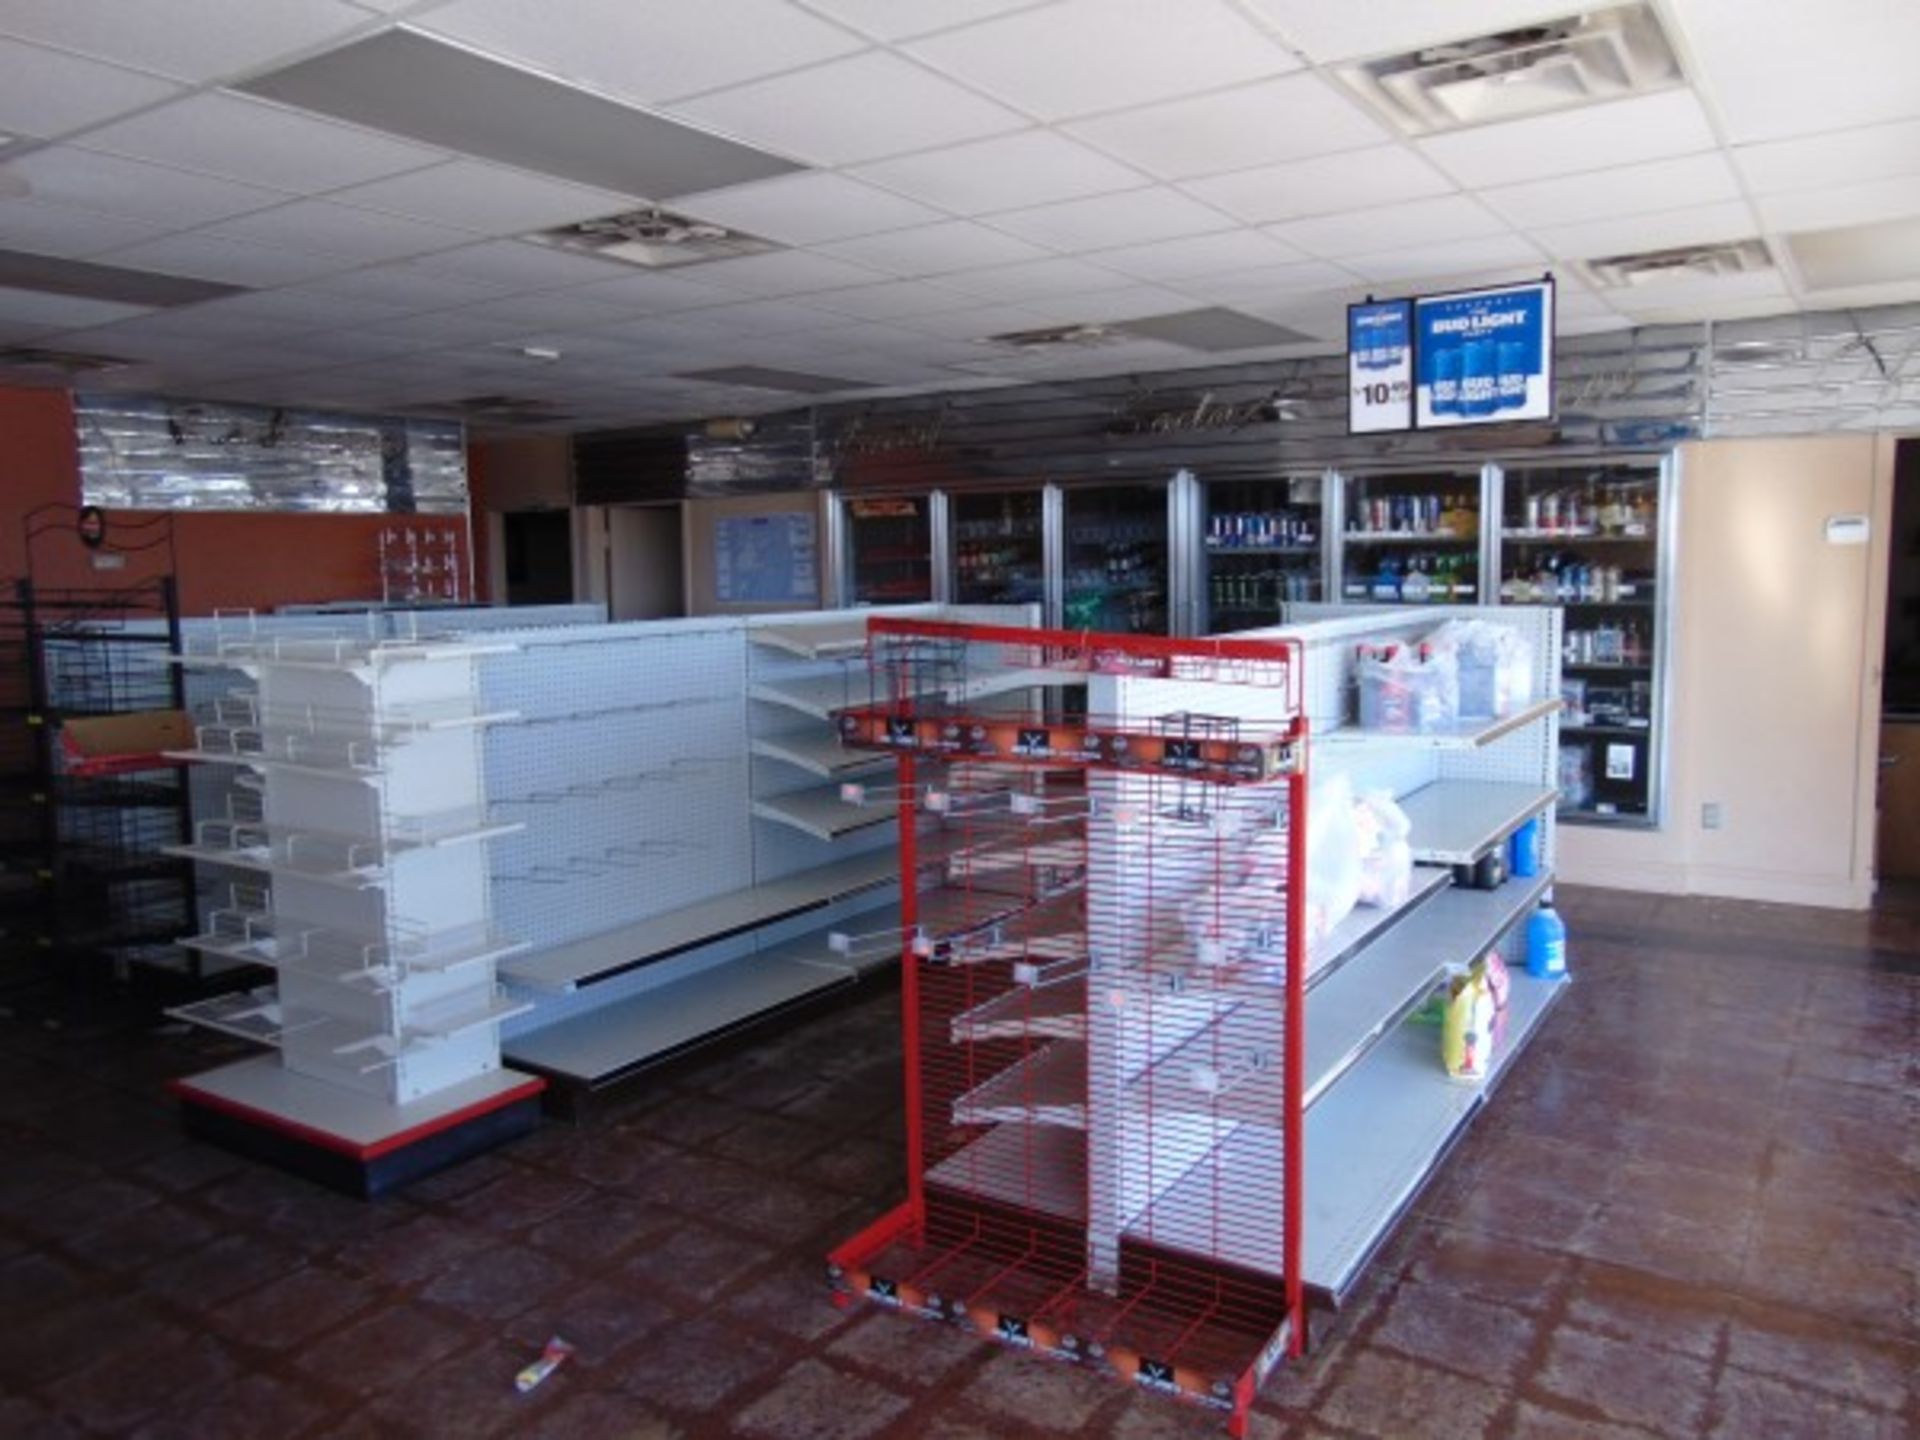 Commercial Property: Bobcat Creek Convenience Store ,Located in Sayre Oklahoma of I-40 exit 25 . - Image 2 of 3